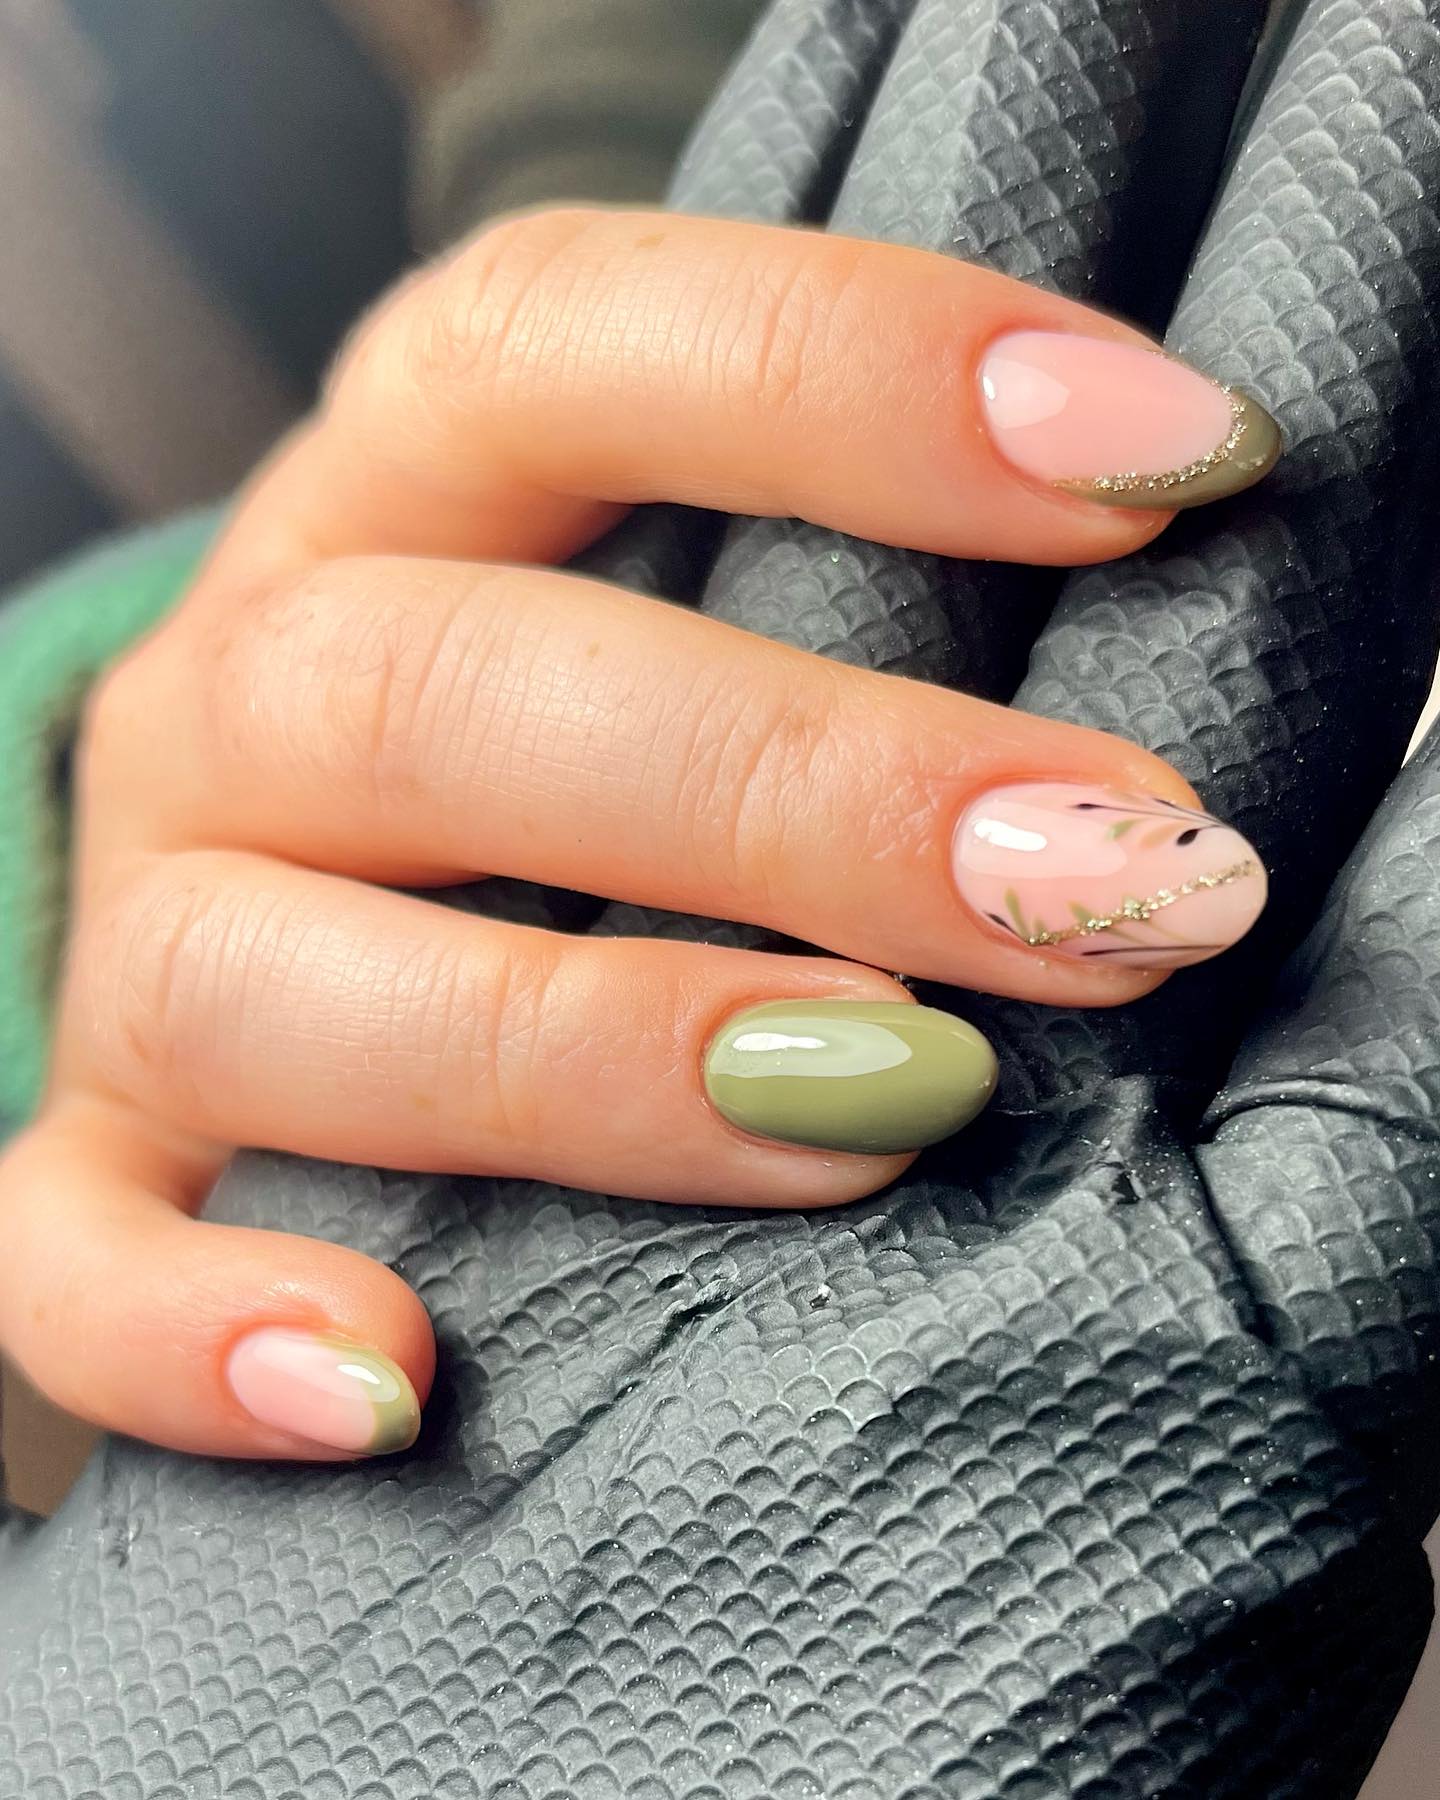 Amazing Nail Spa - 💋Sweet Nail Designs Ideas for Valentine's Day💝 💅Are  you looking for inspiration for your Valentine's Day nails, but still want  to look chic & sophisticated?😍We've got a round